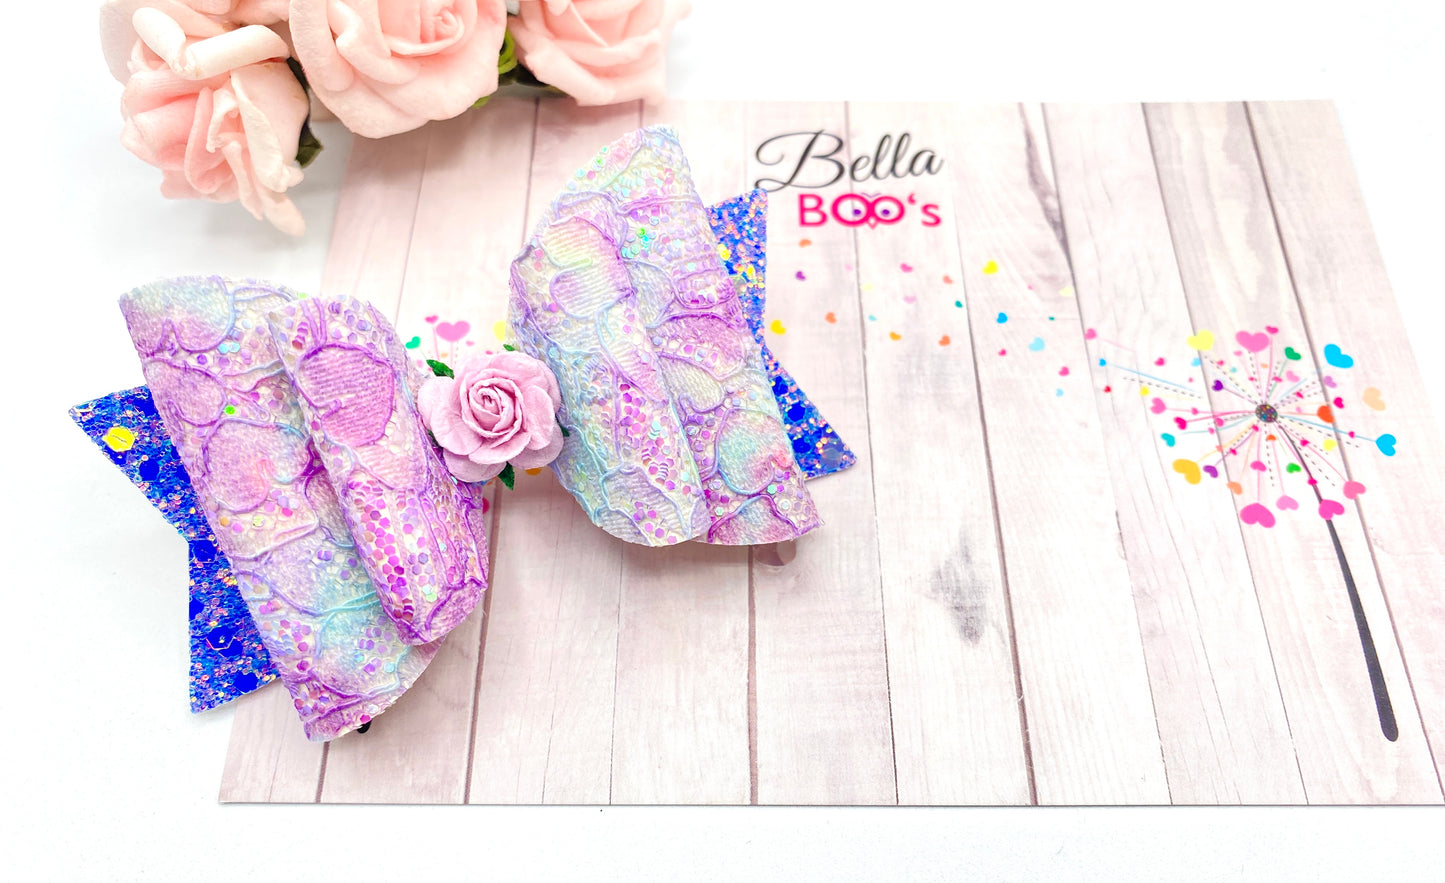 Load image into Gallery viewer, Lilac Glitter Lace  Hair Bow
